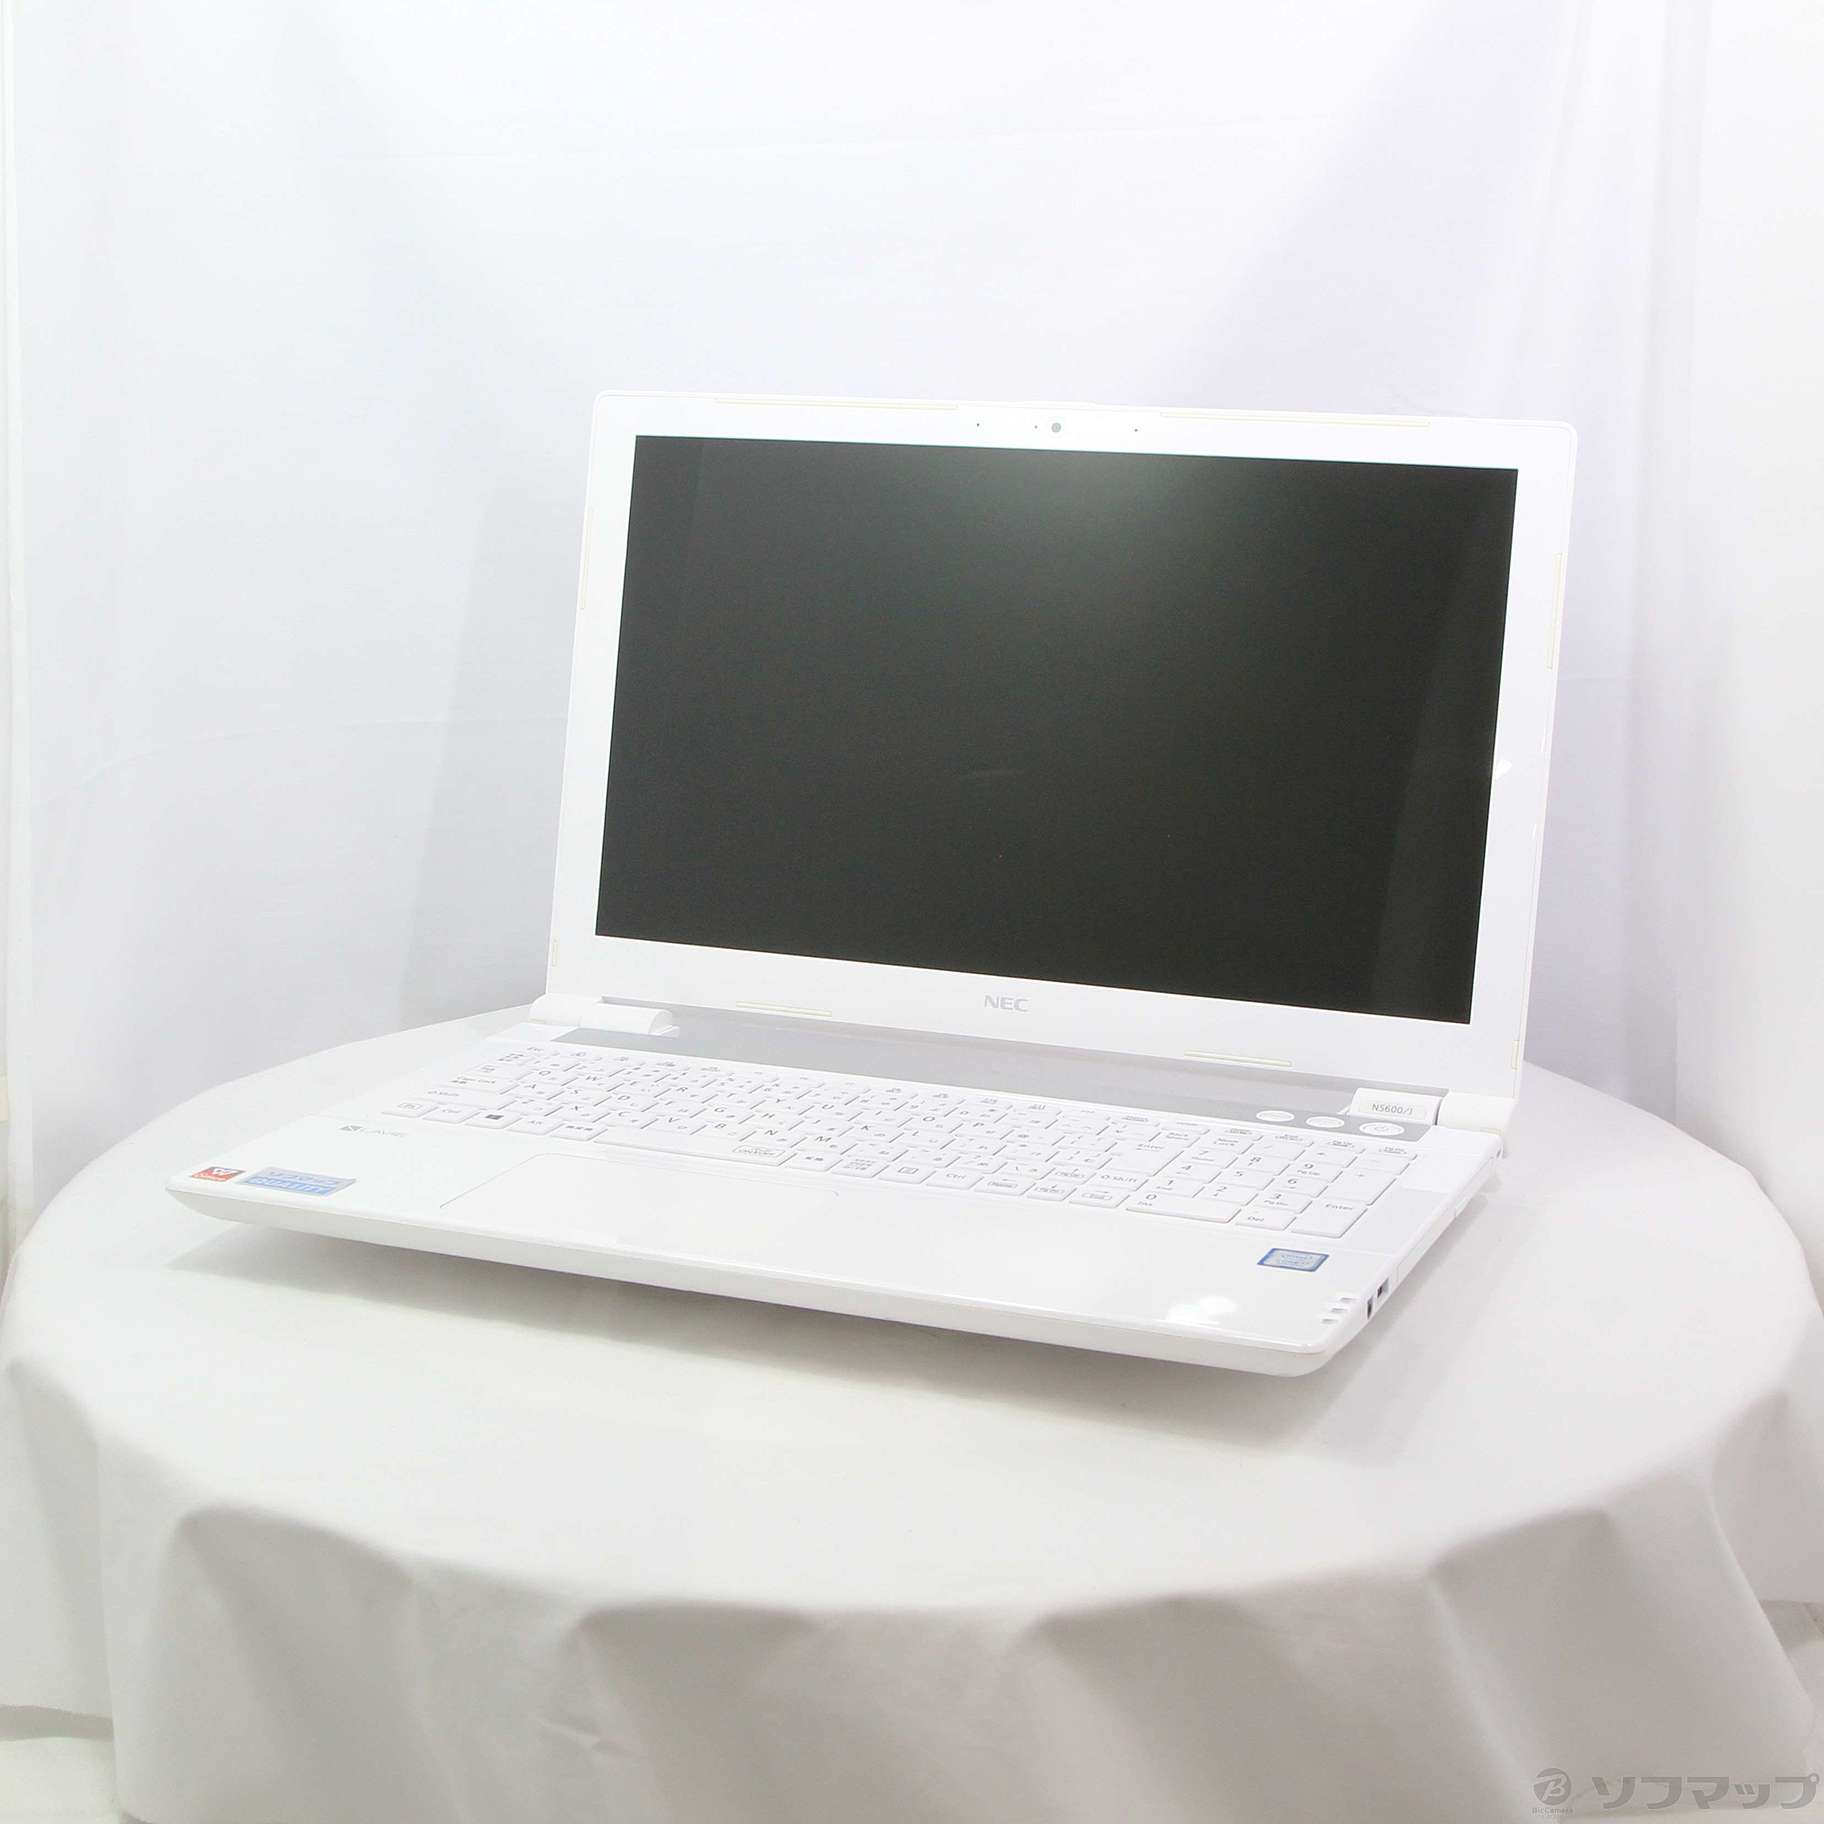 NEC LAVIE Note PC-NS600JAW